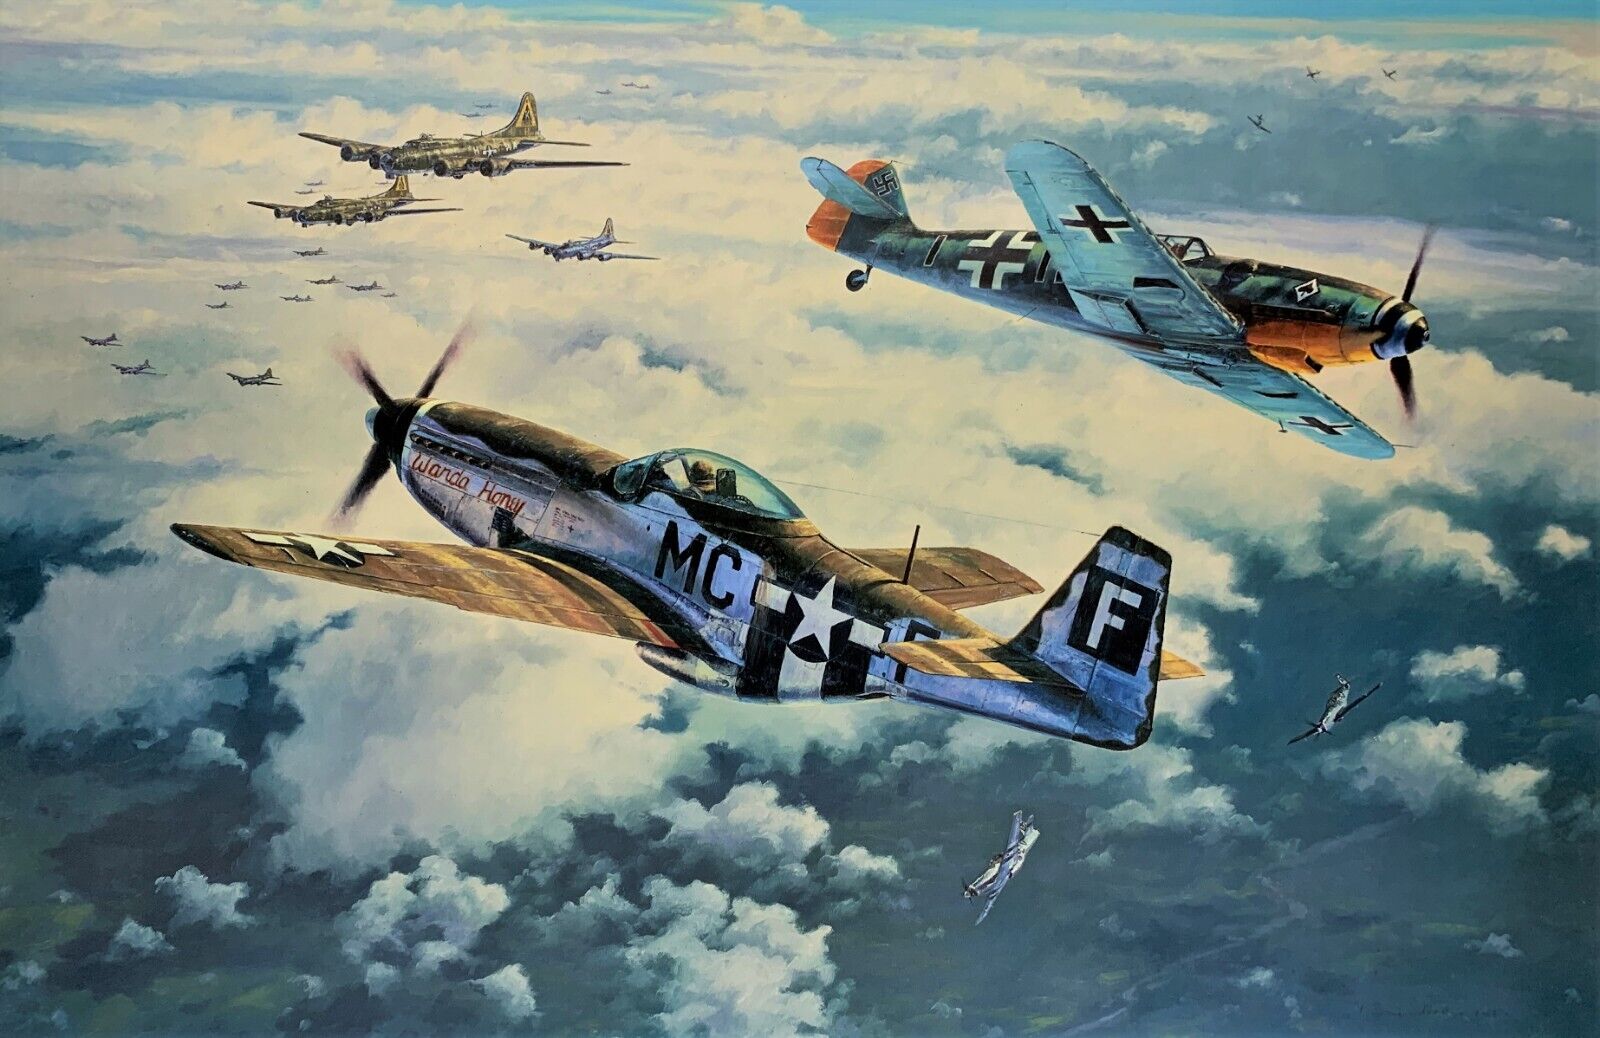 Clash of Eagles by Anthony Saunders art signed by Mustang and Luftwaffe Pilots